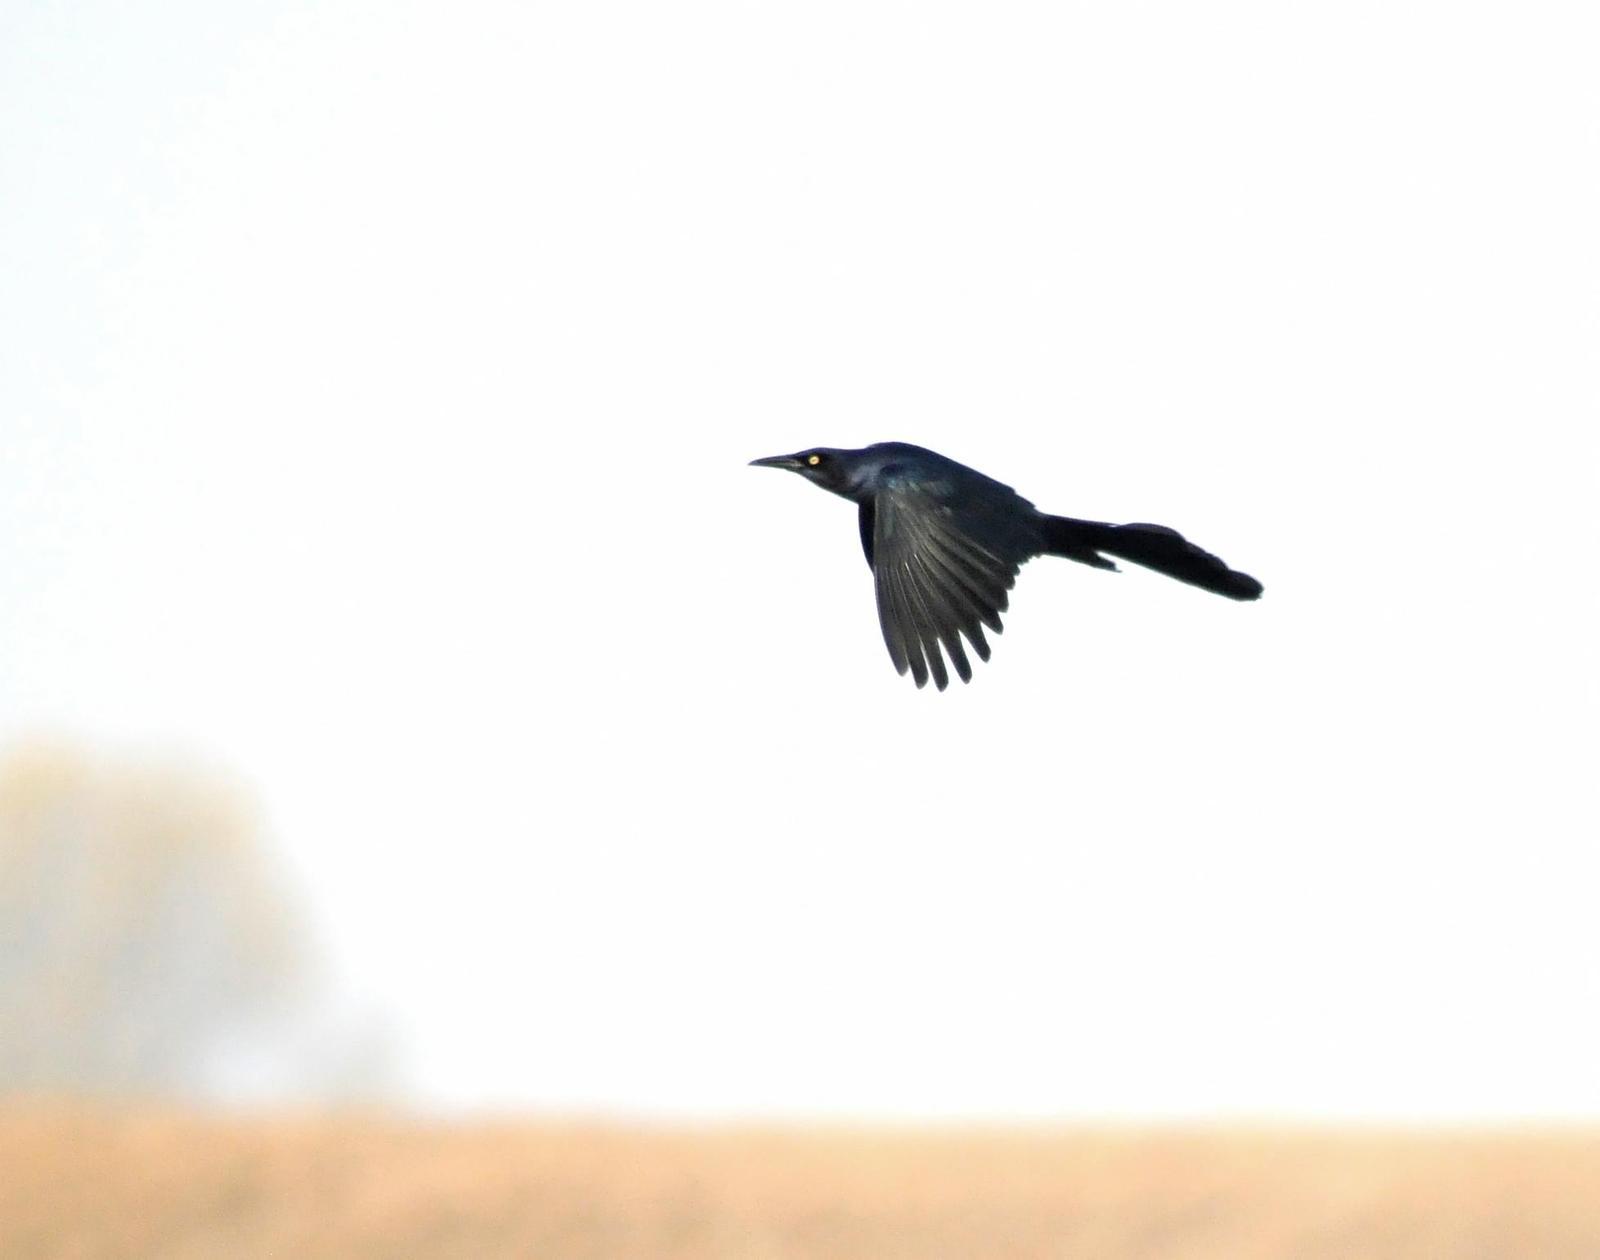 Great-tailed Grackle Photo by Steven Mlodinow